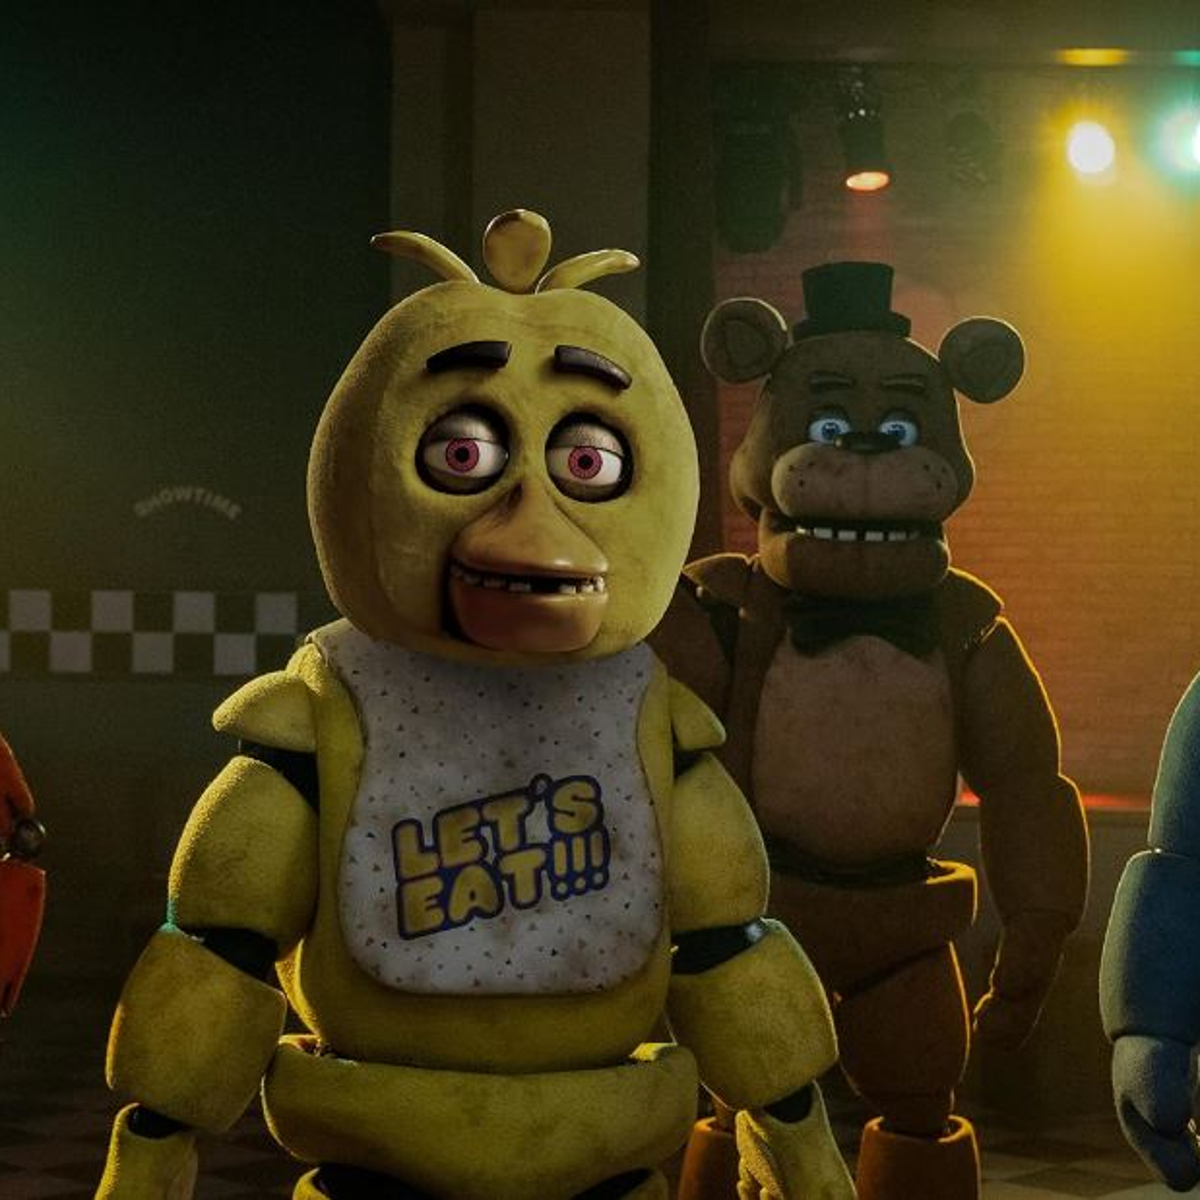 Five Nights at Freddy's: The Official Movie Novel See more